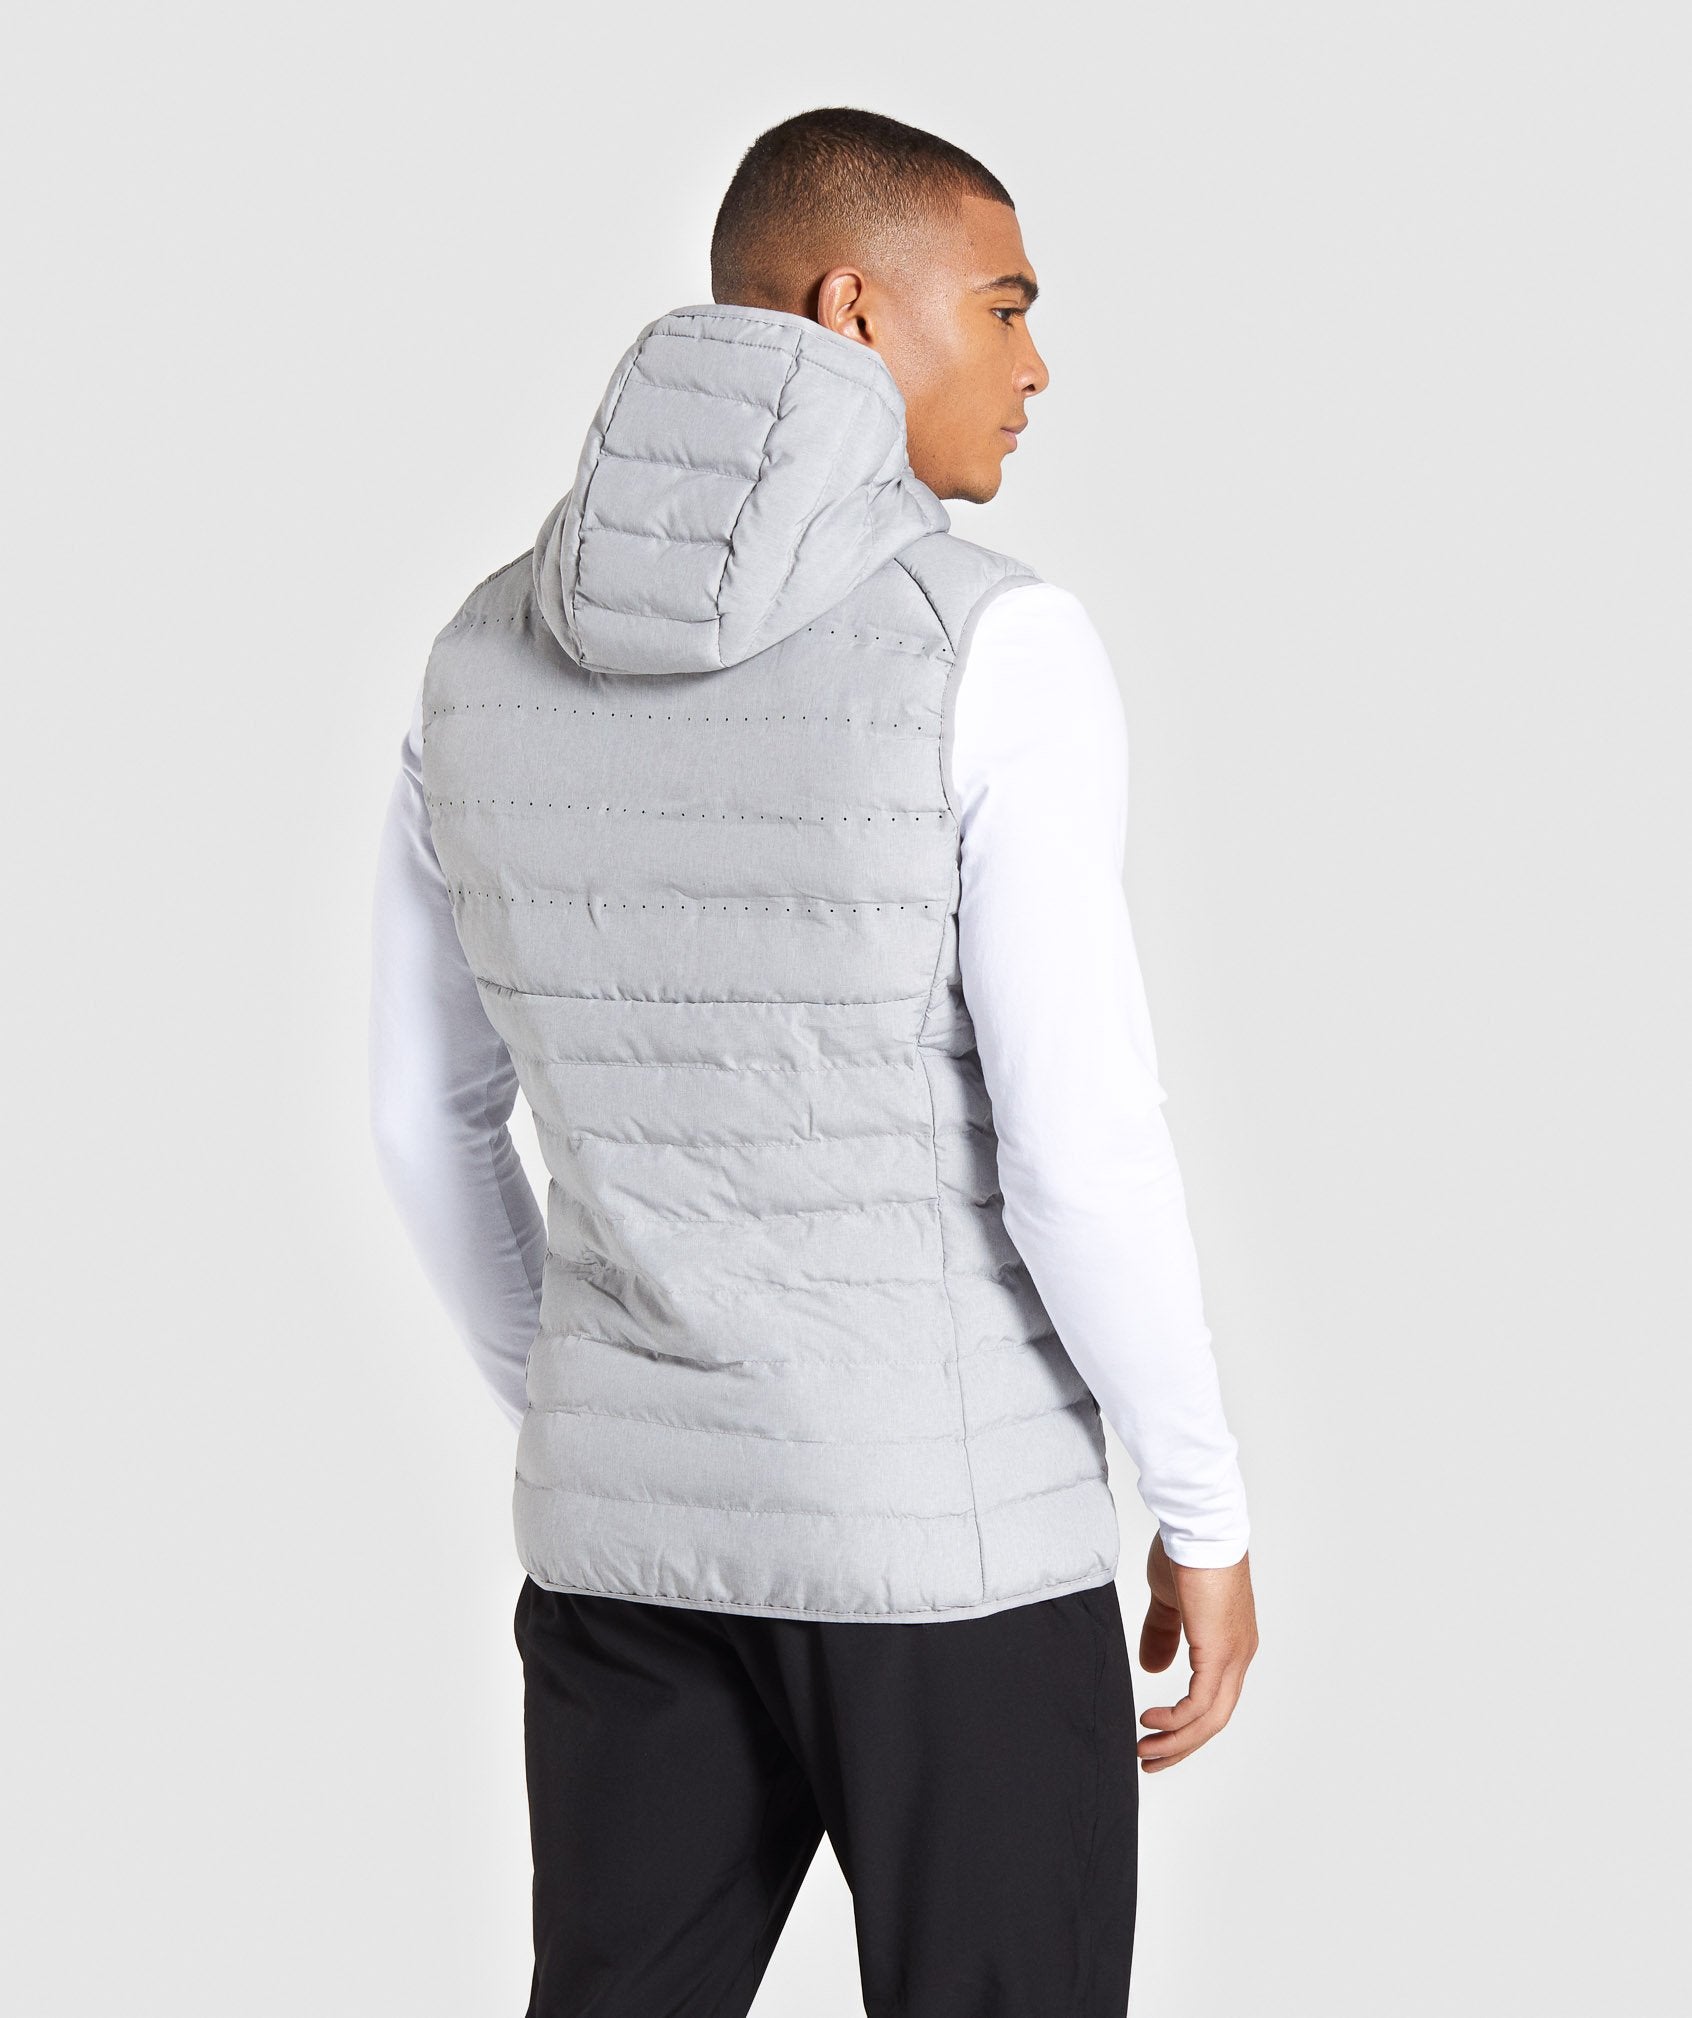 Sector Gilet V2 in Light Grey - view 2